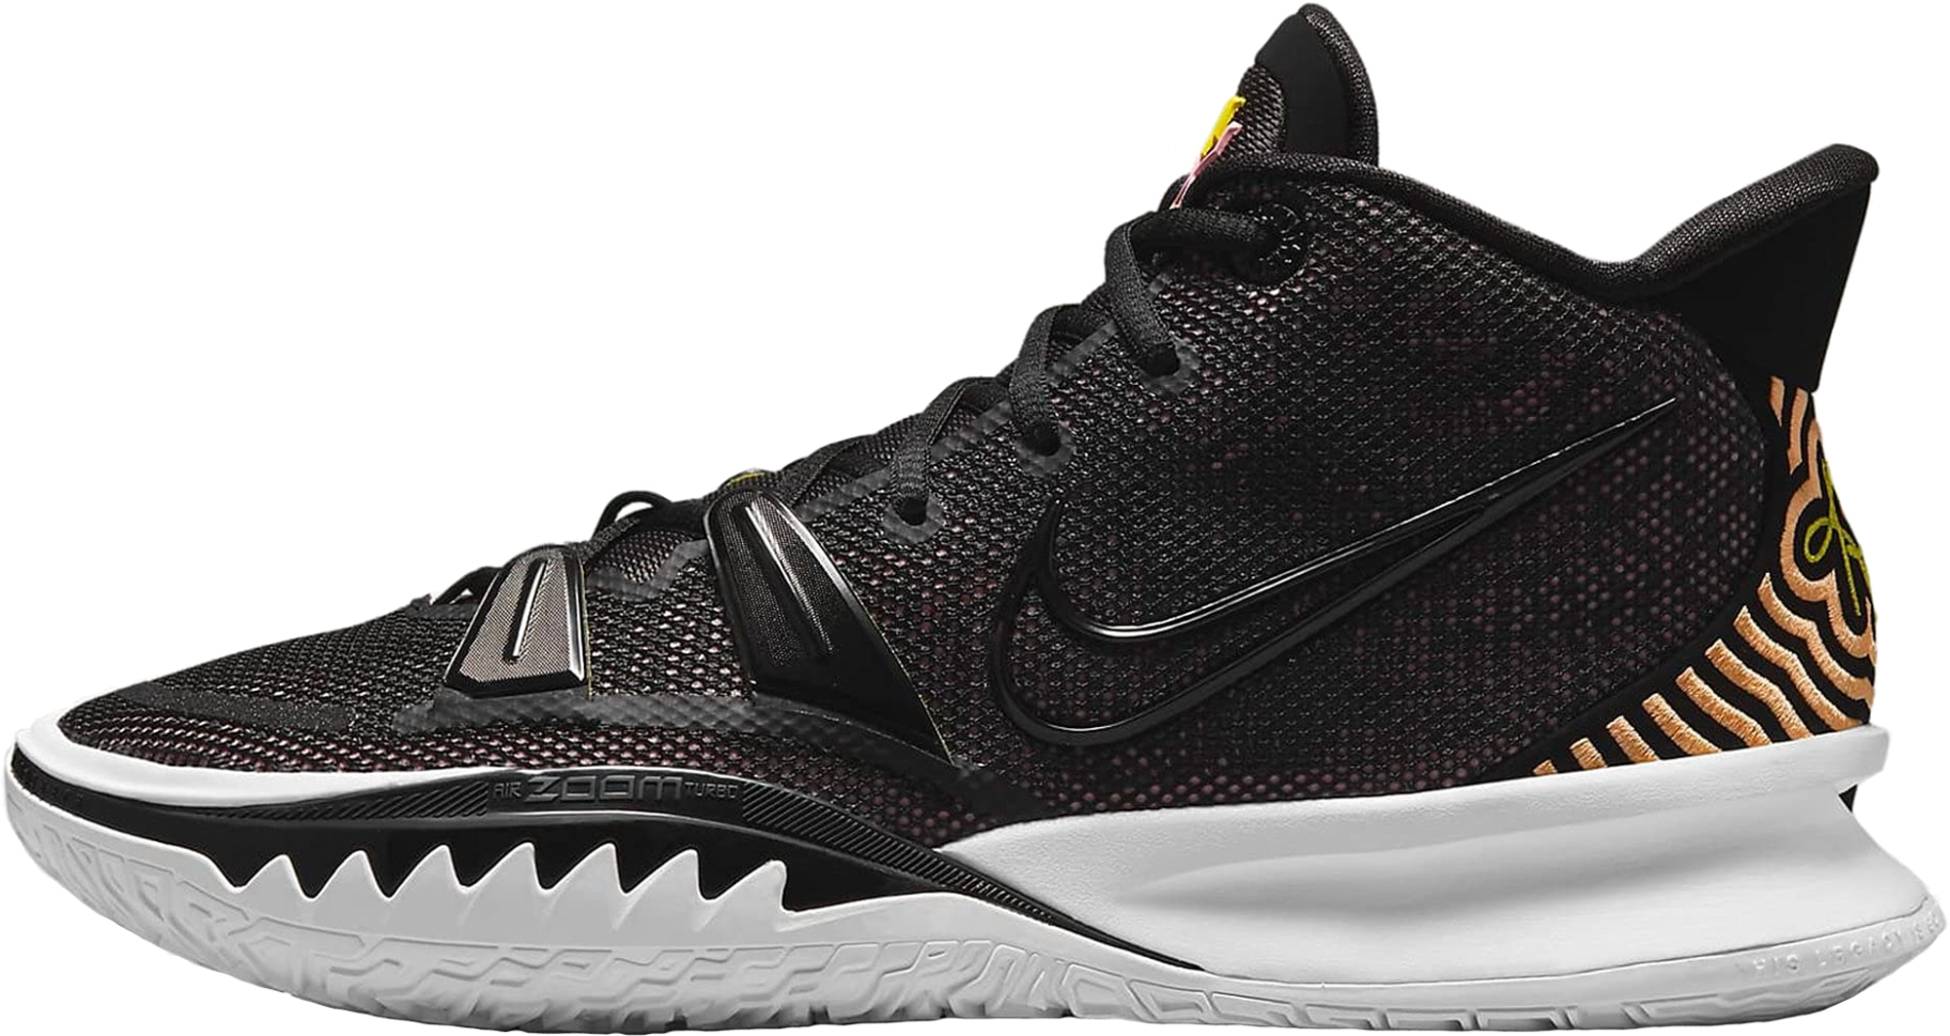 kyrie irving's basketball shoes